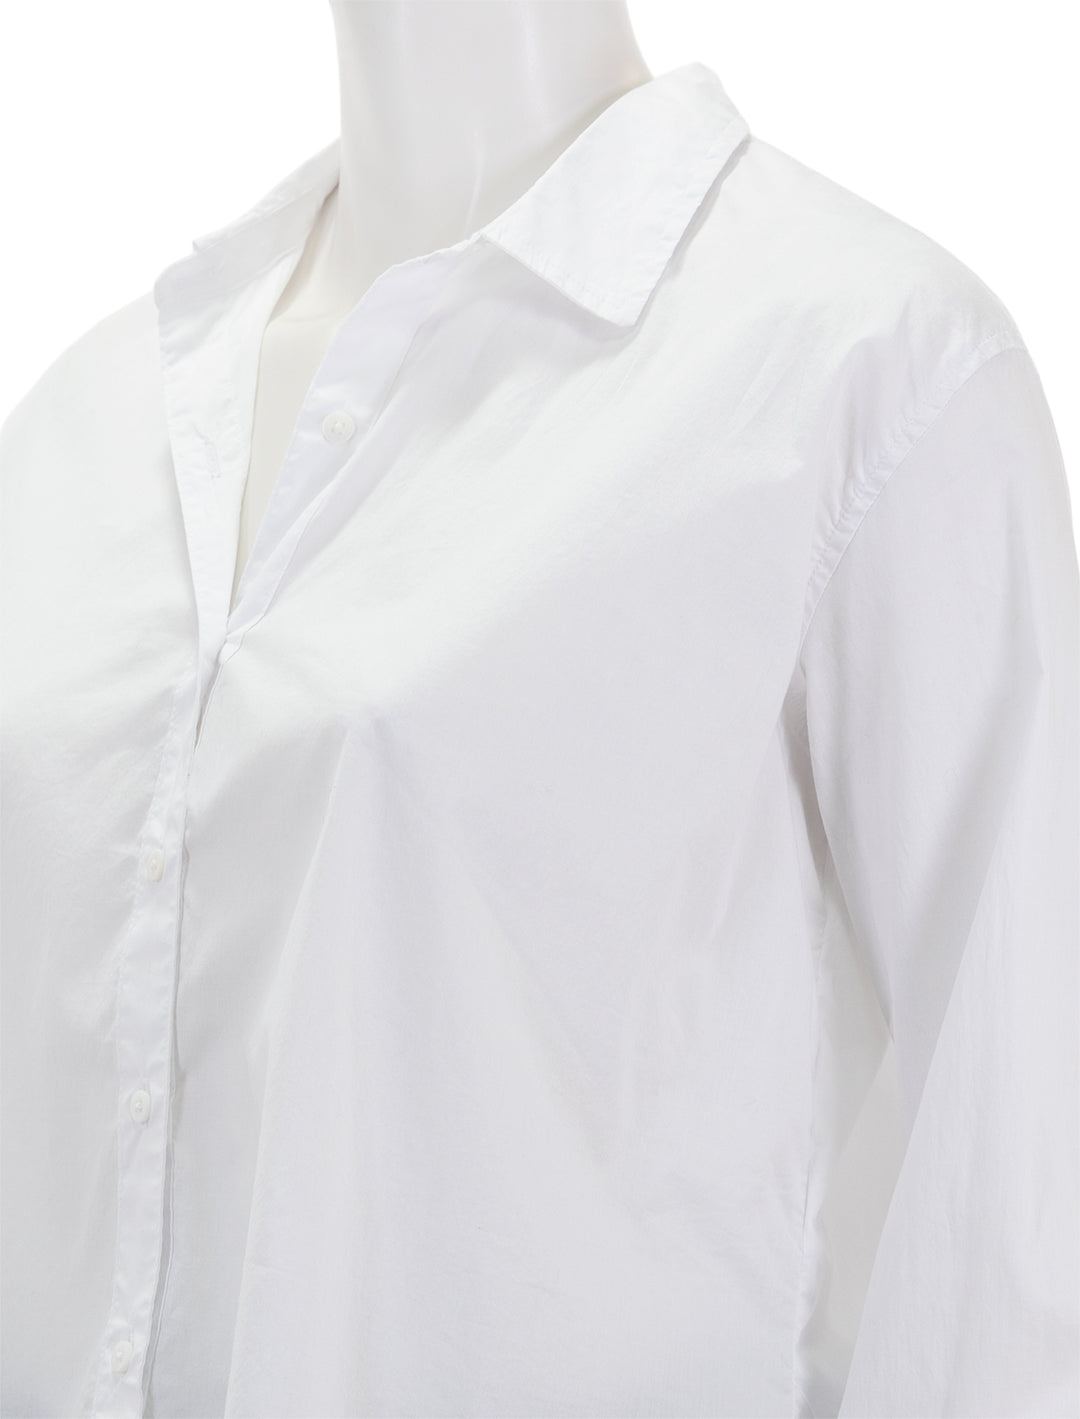 Close-up view of Splendid's cropped poplin button down in white.